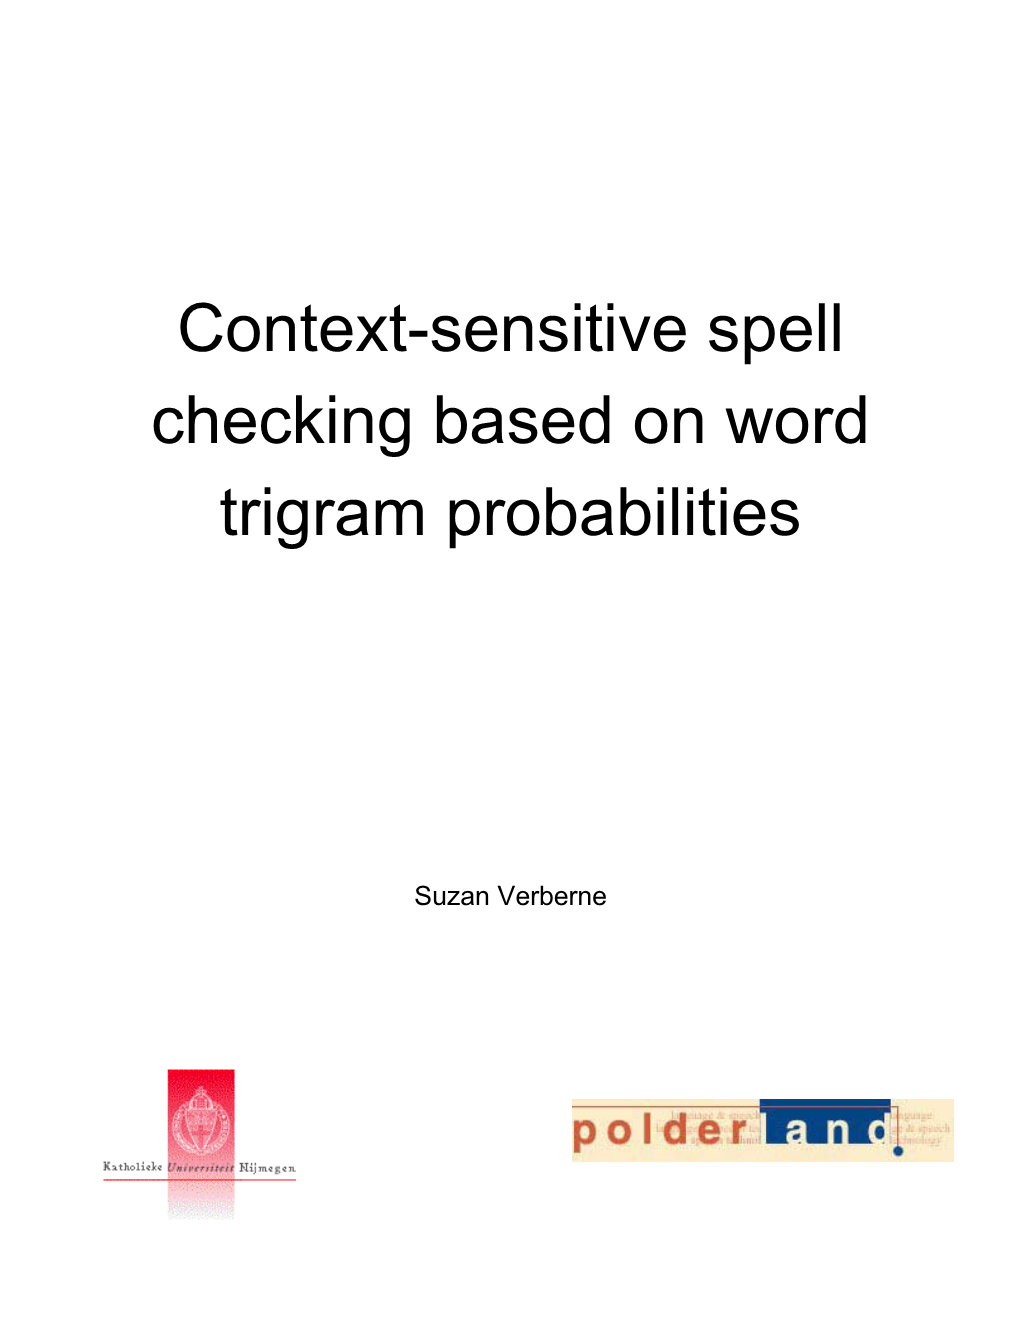 Context-Sensitive Spell Checking Based on Word Trigram Probabilities